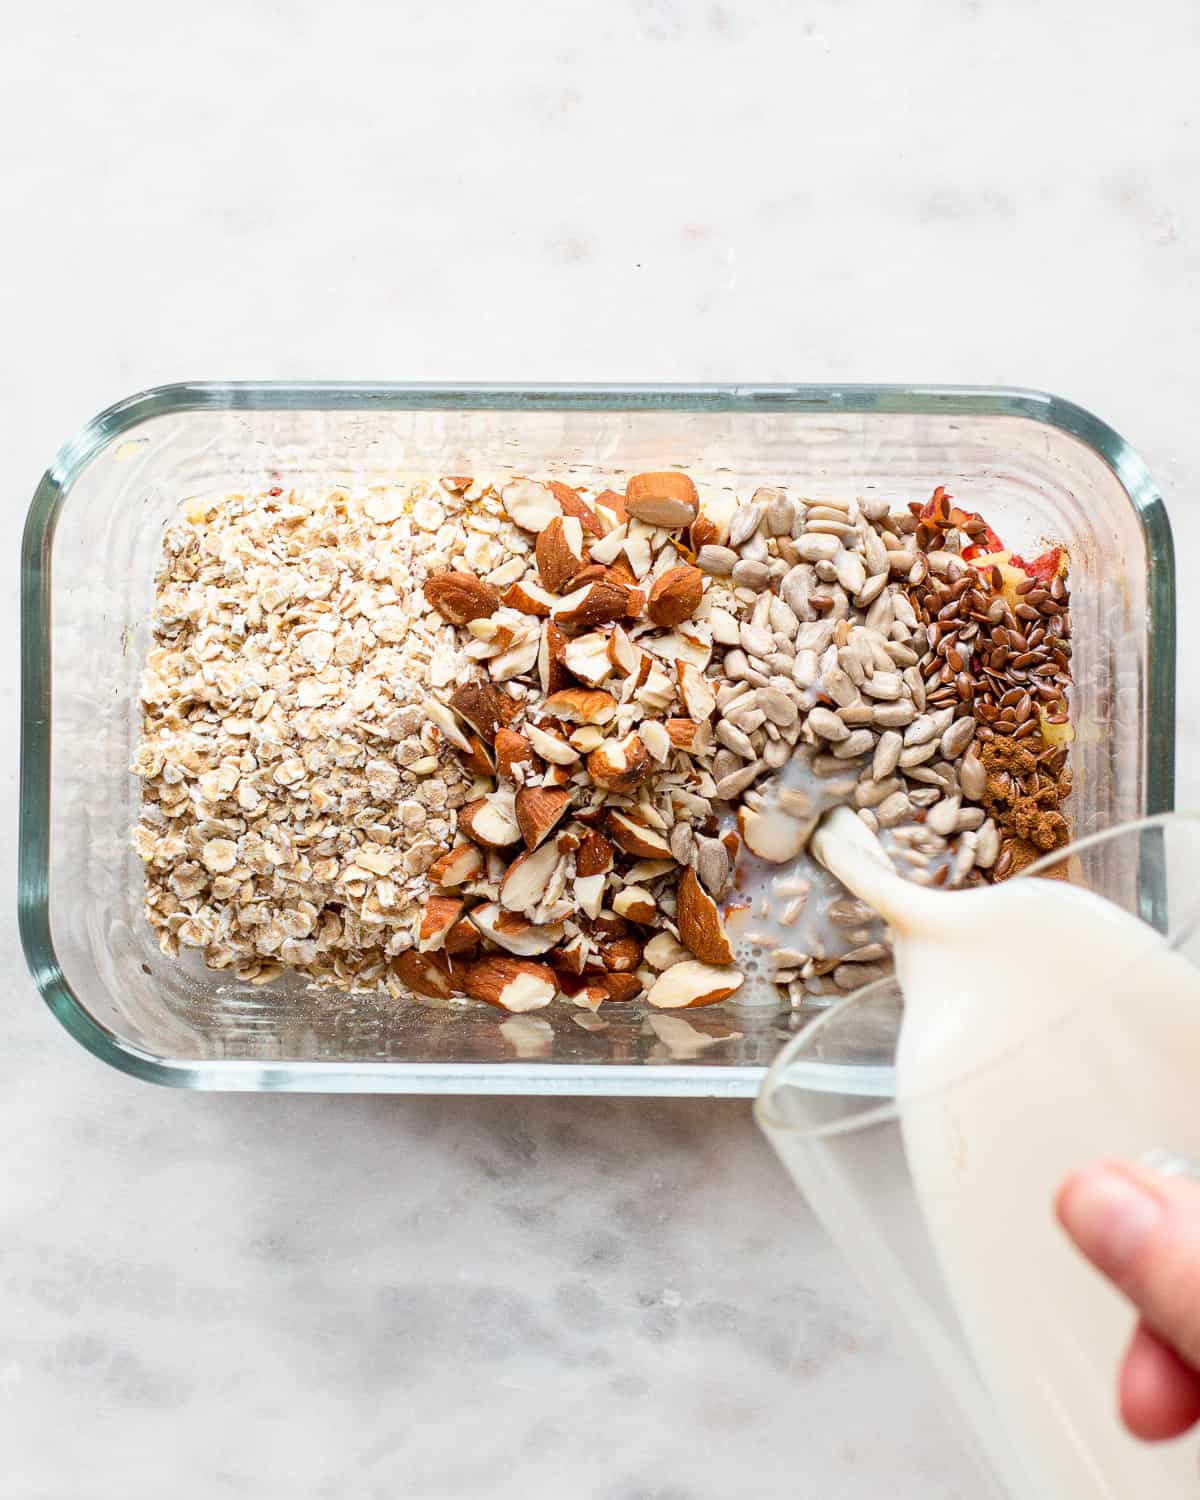 Hand pouring milk into a glass container with oats, nuts, ands seeds.